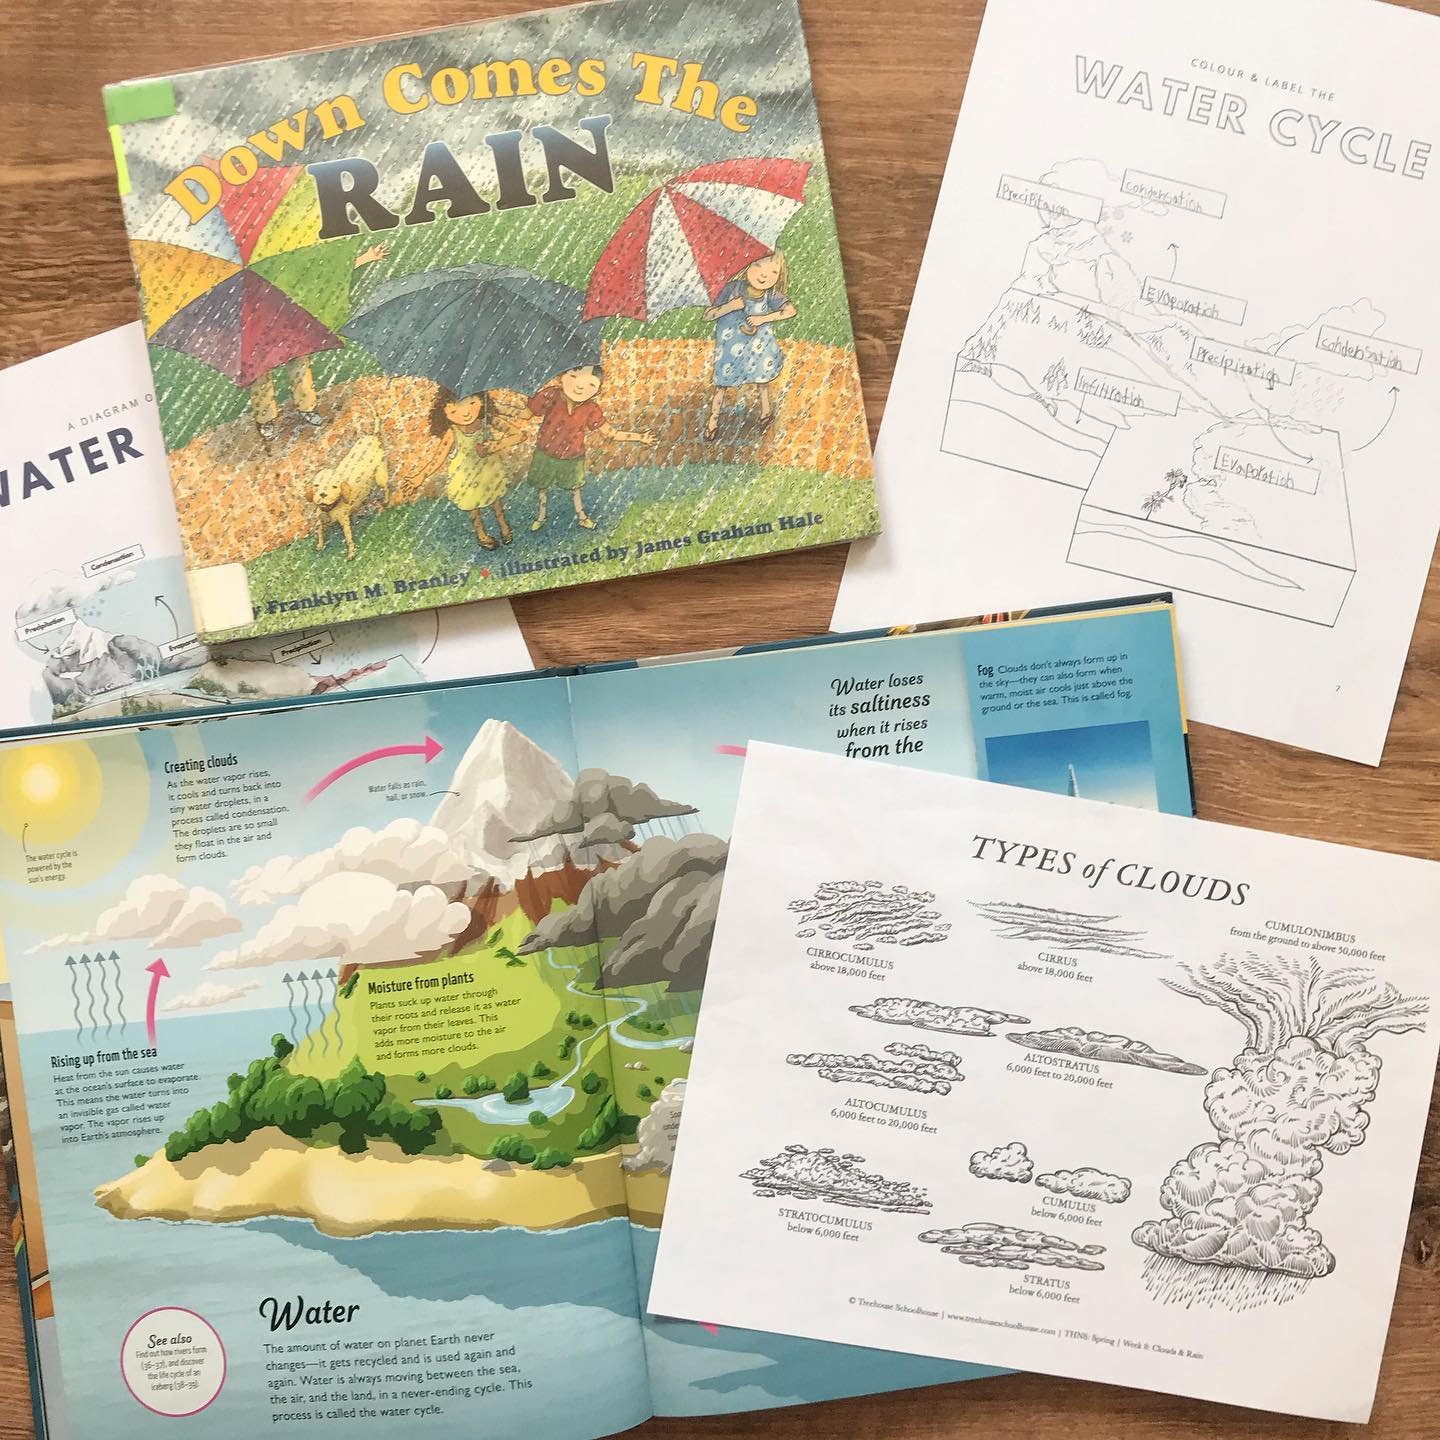 Homeschool Recap: This week we learned about clouds and rain for our nature study. We reviewed the many types of clouds and read about the water cycle. Elliot completed his diagram and we discussed each step of the cycle. We also had a nice art &amp;